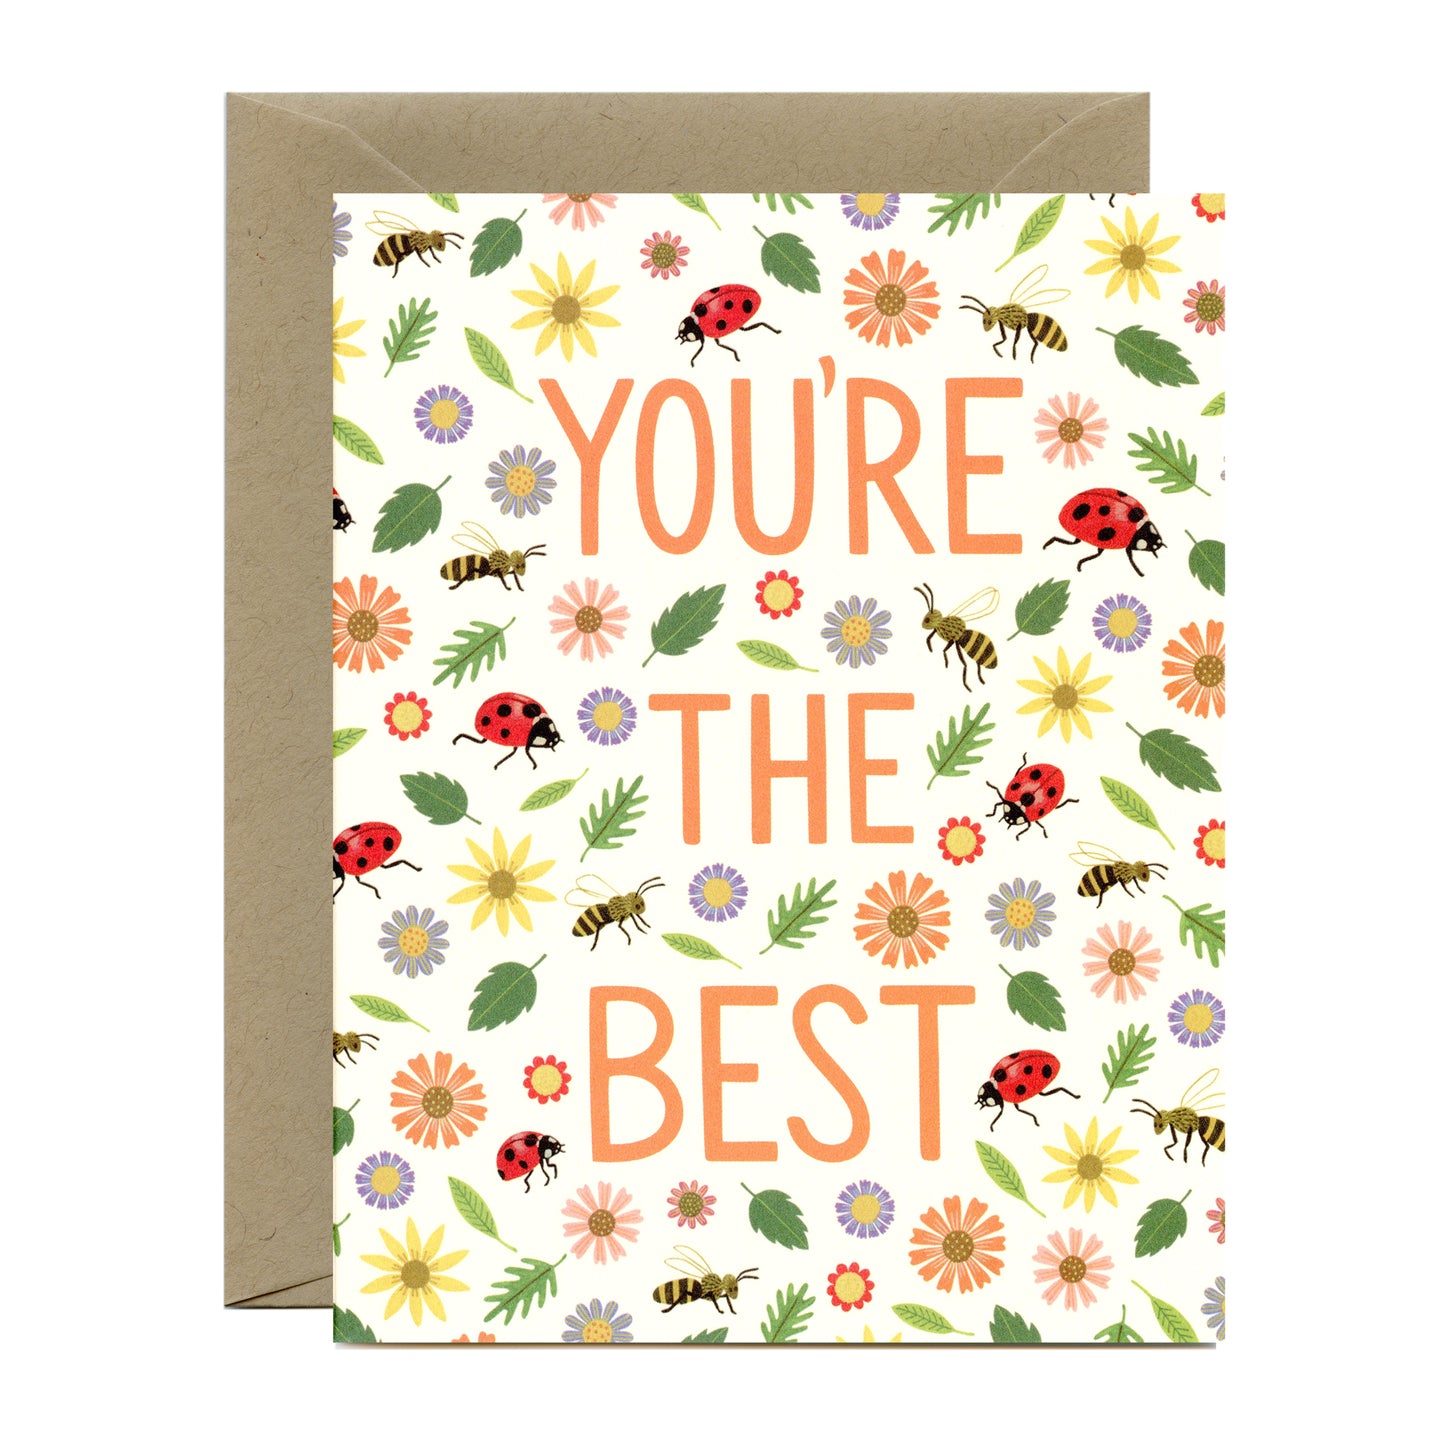 LADYBUGS, BUMBLE BEES AND FLOWERS - THANK YOU GREETING CARD